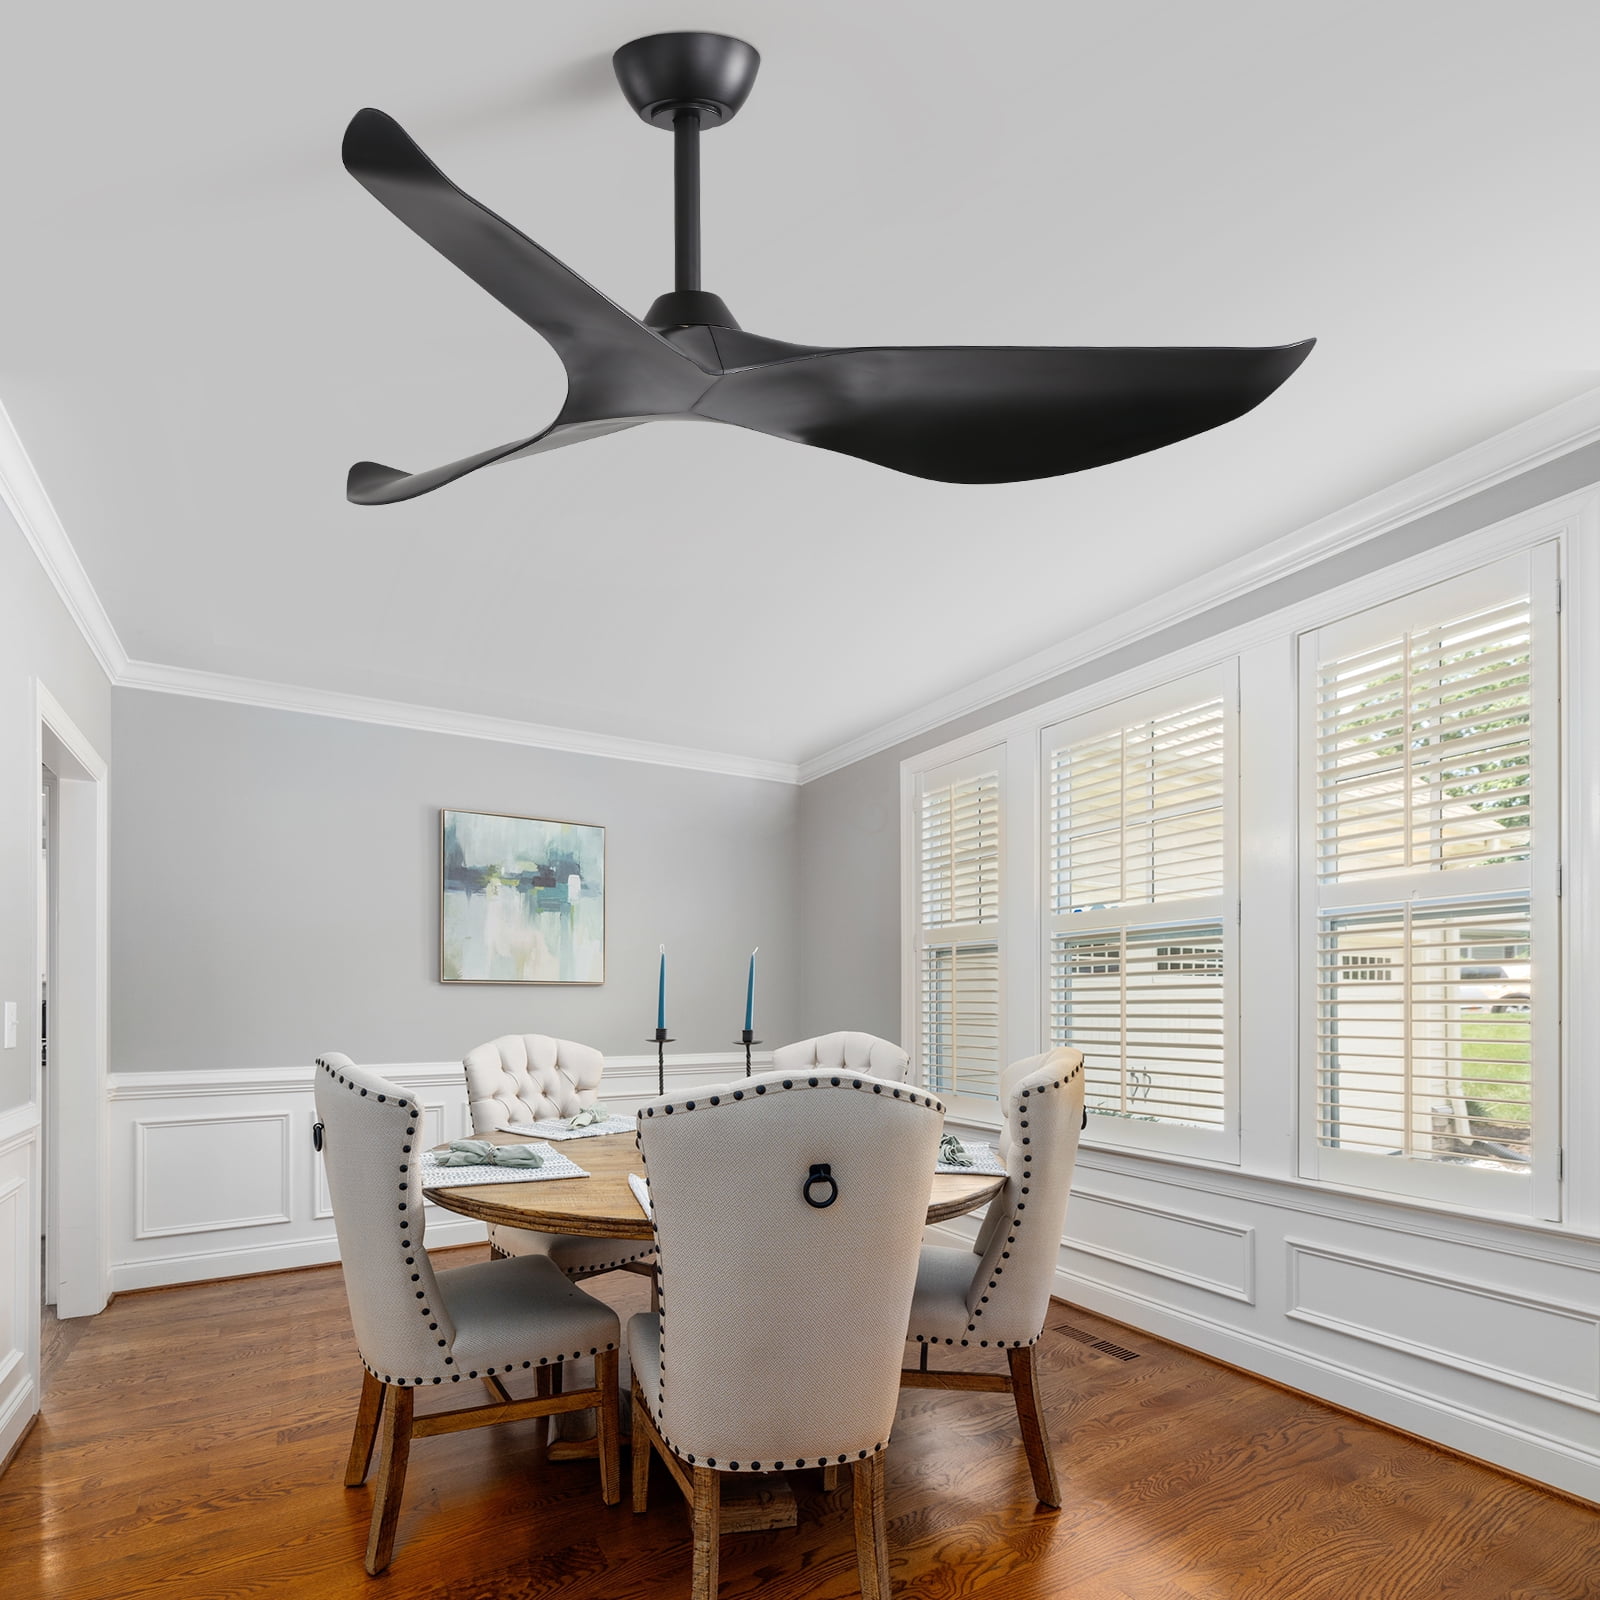 Sofucor 52inch Wood Ceiling Fan With